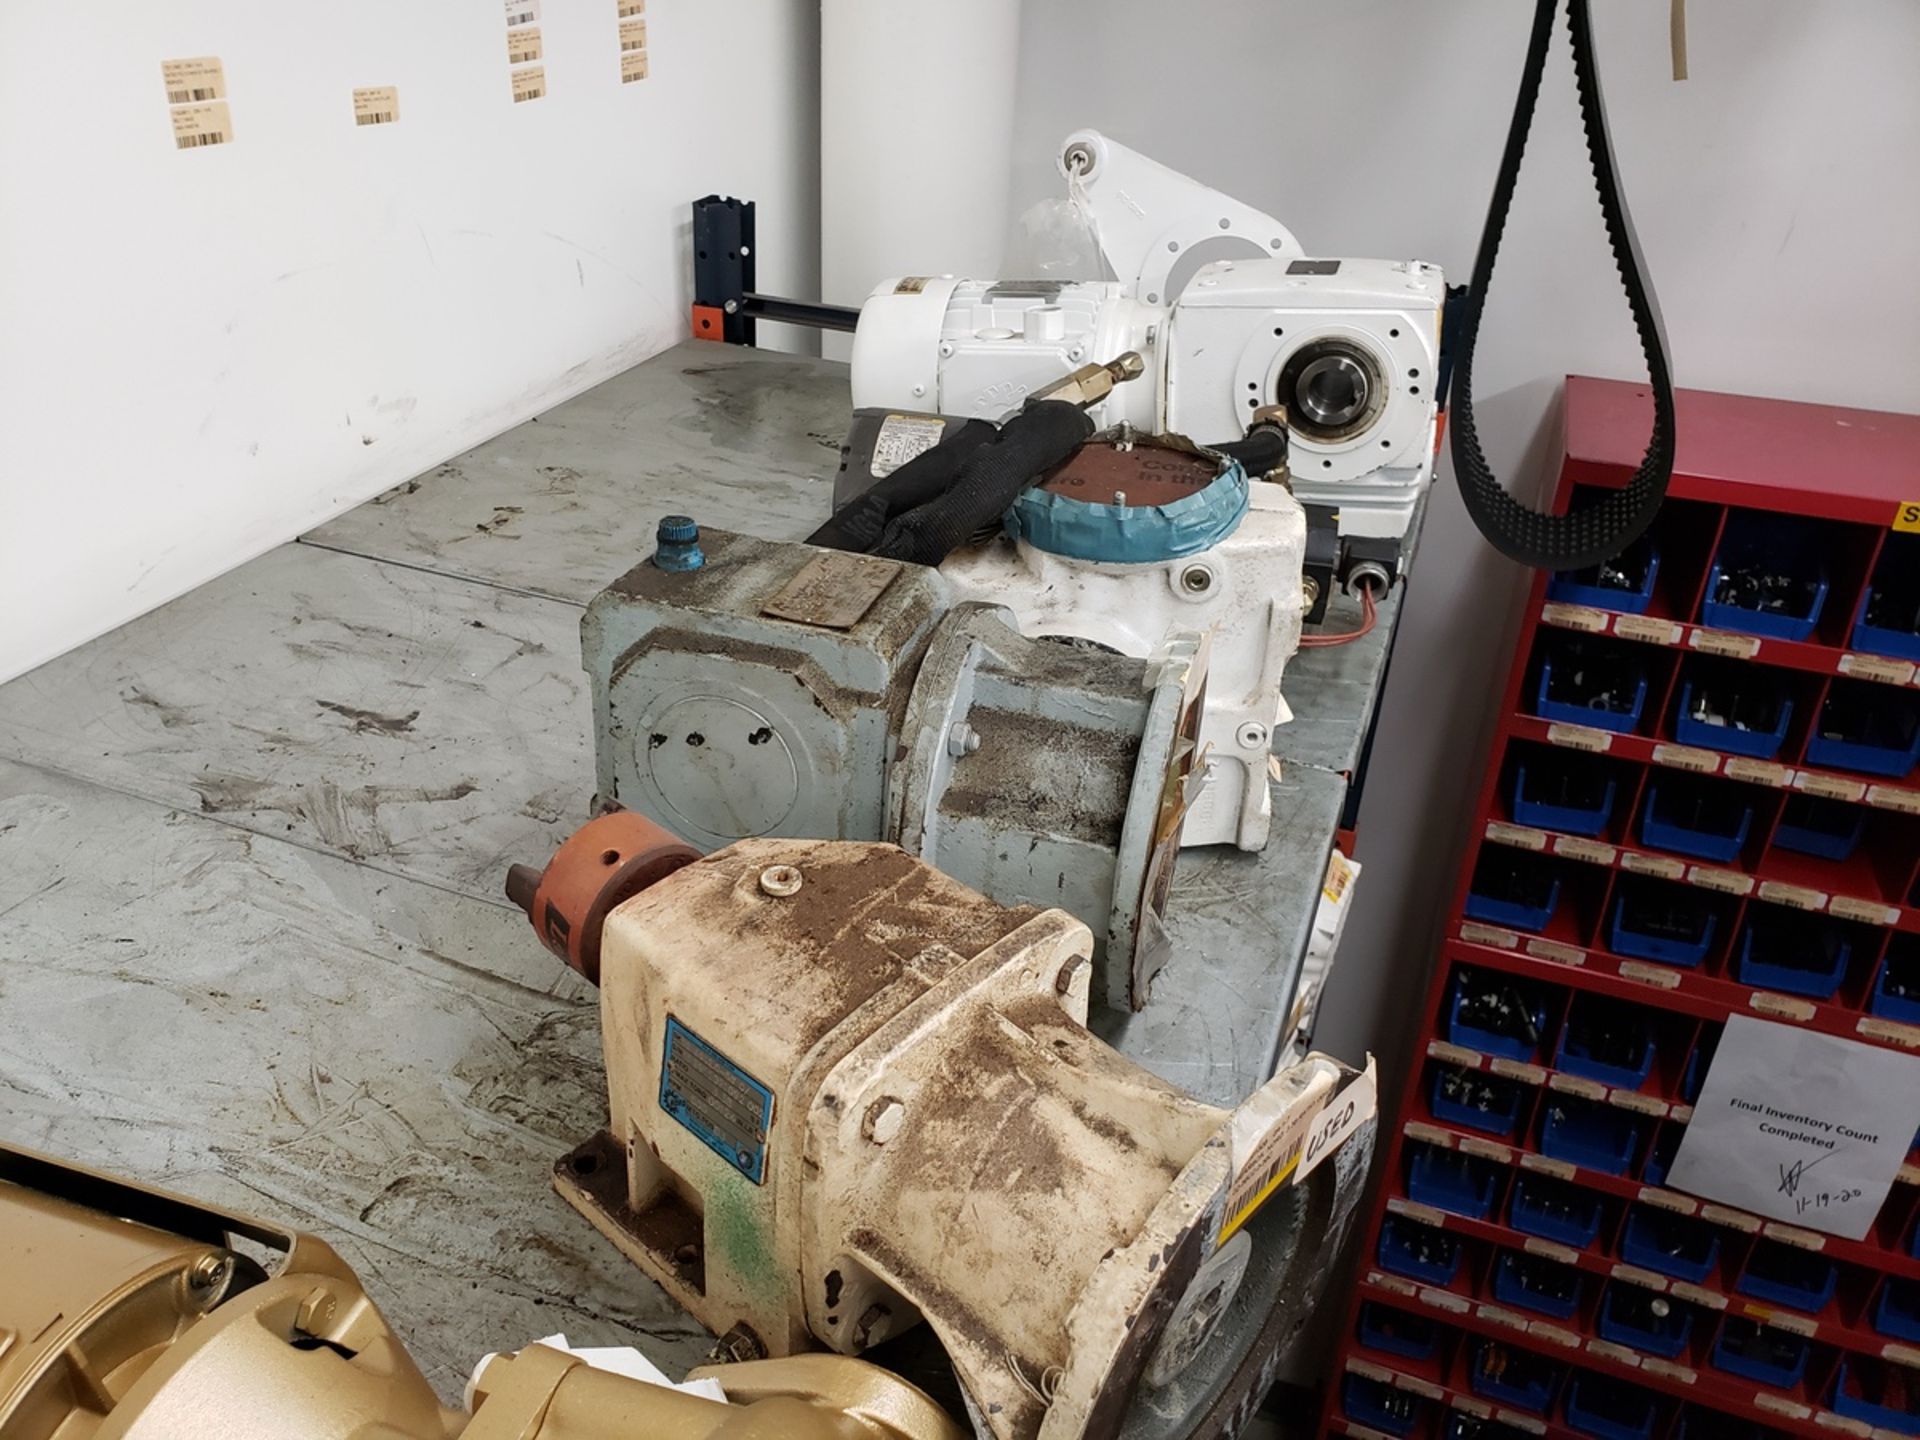 Lot of Pumps, Electric Motors & Gearboxes - Subj to Bulk | Reqd Rig Fee: $100 - Image 3 of 3